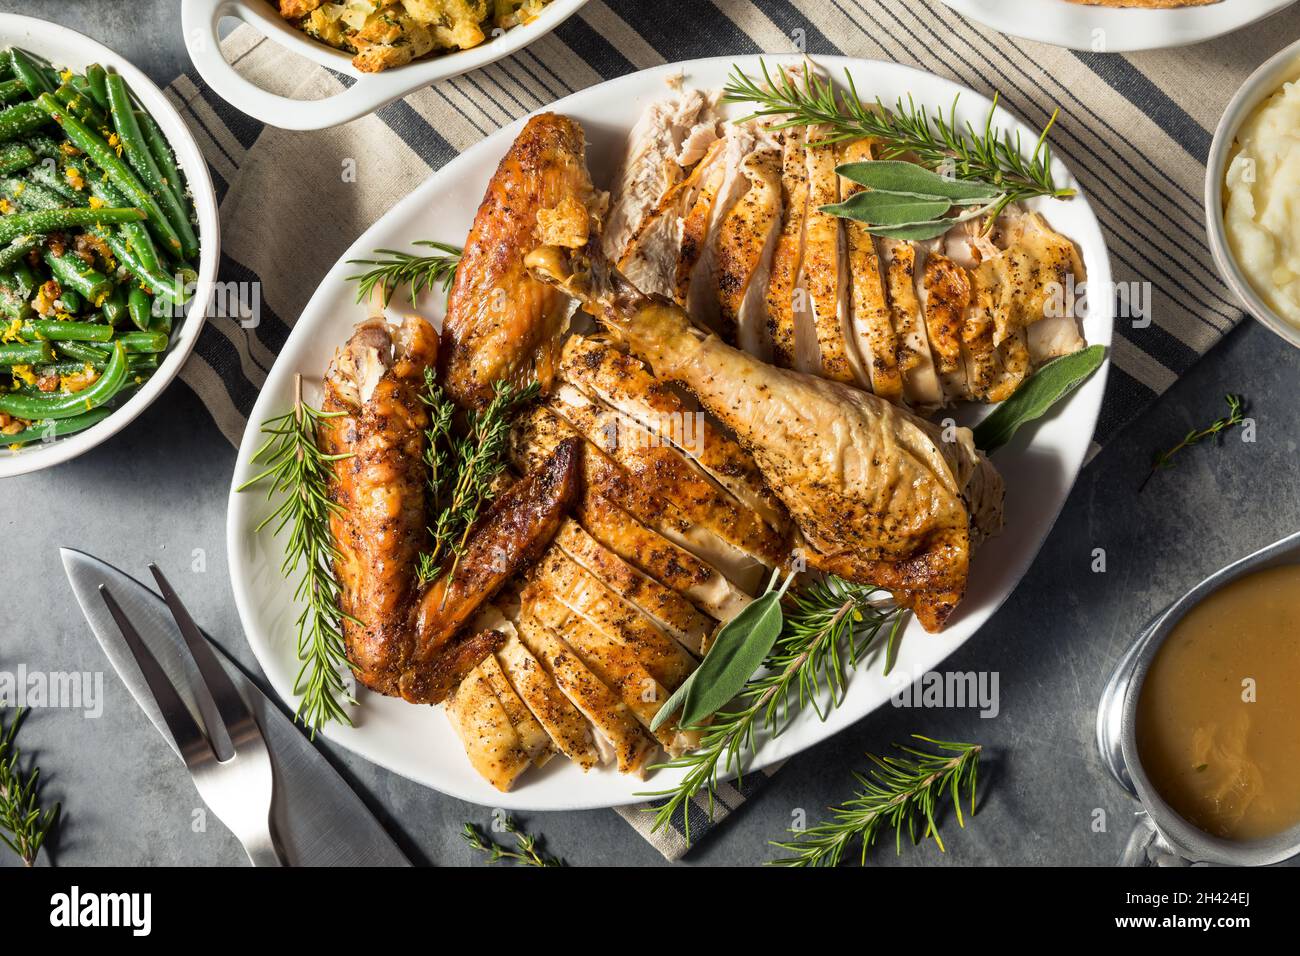 Festive Thanksgiving Day Turkey Dinner with Stuffing Pumpkin PIe and Potatoes Stock Photo